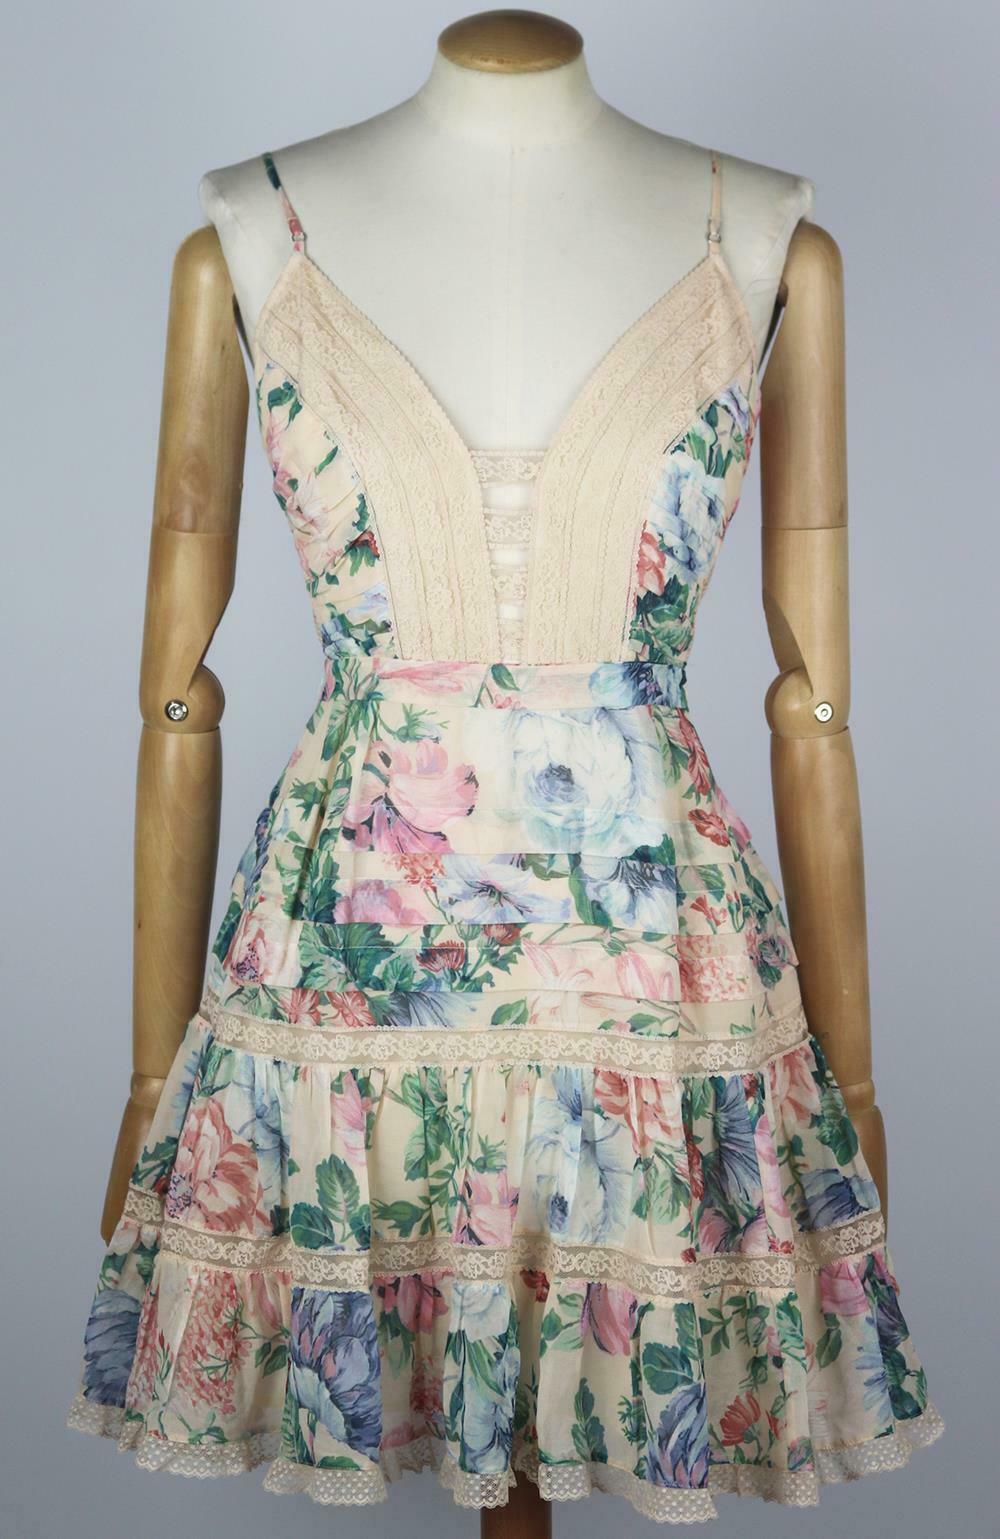 Zimmermann's feminine 'Verity' dress is made from lightweight cotton and silk-blend chiffon that's printed with vintage-inspired blooms, it has thin adjustable straps and delicate lace trims along the fitted bodice and flowy, tiered skirt, the